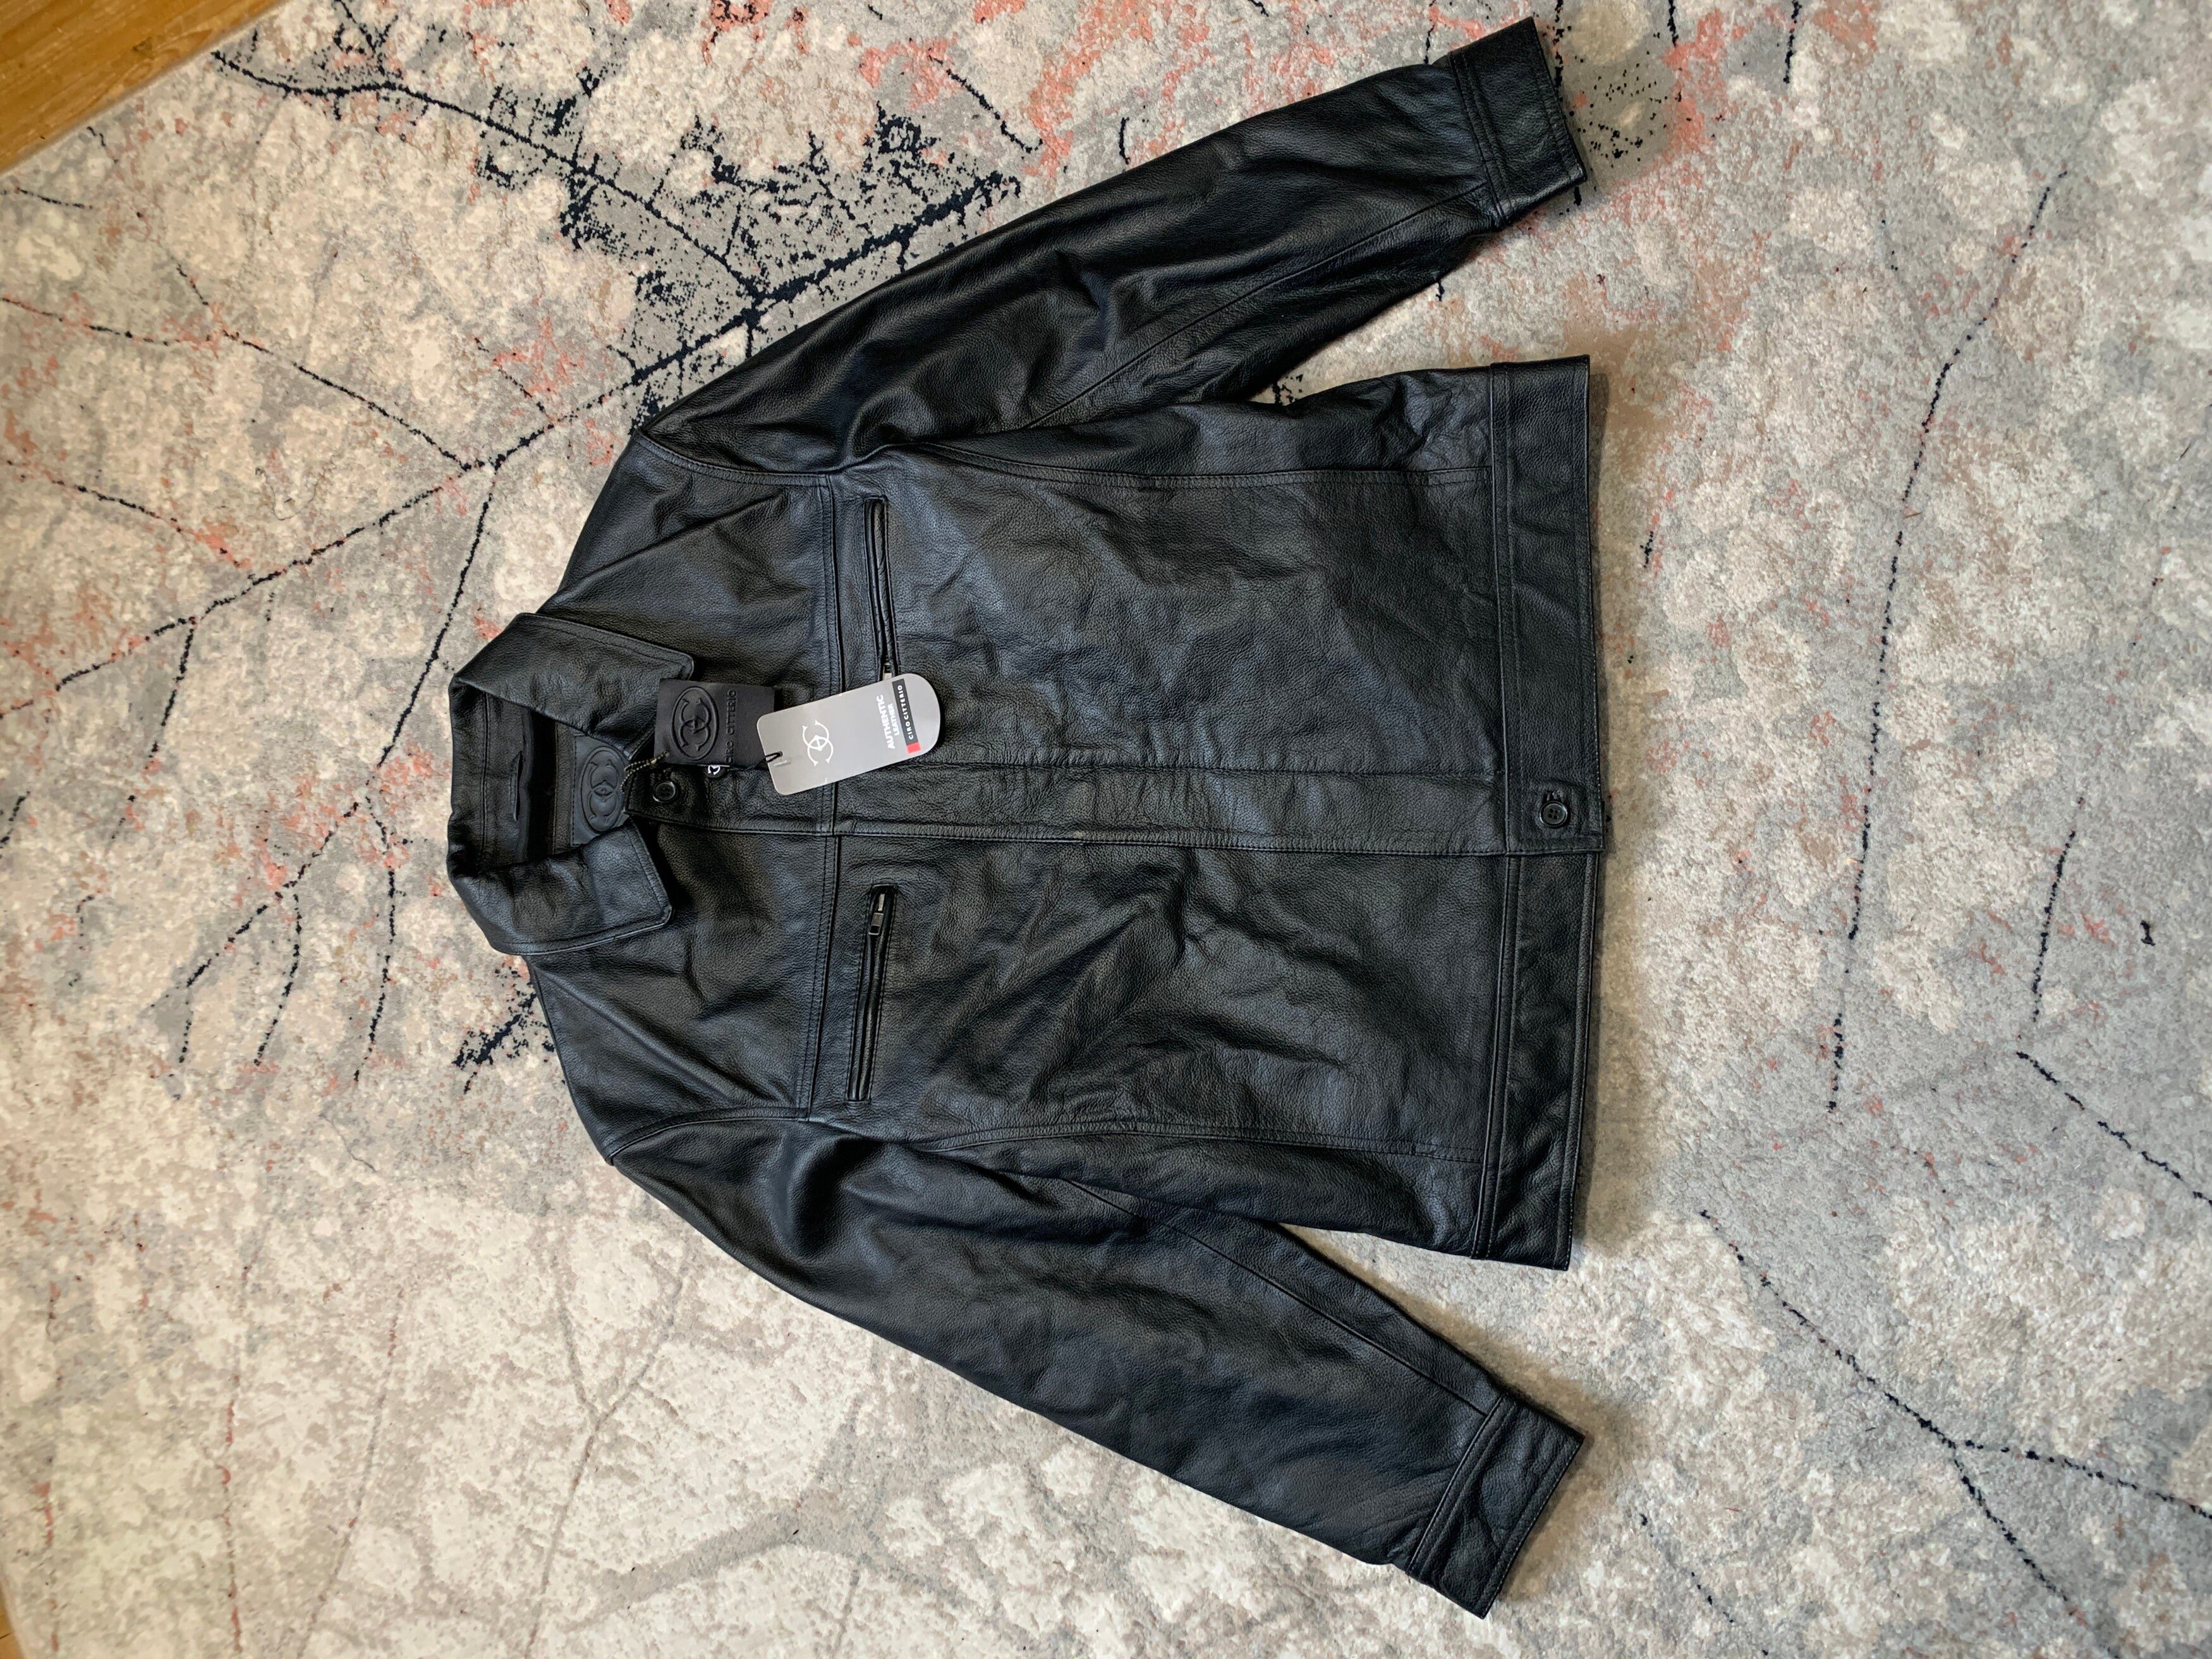 Leather Jacket Ciro Citterio Authentic Leather Jacket | Grailed